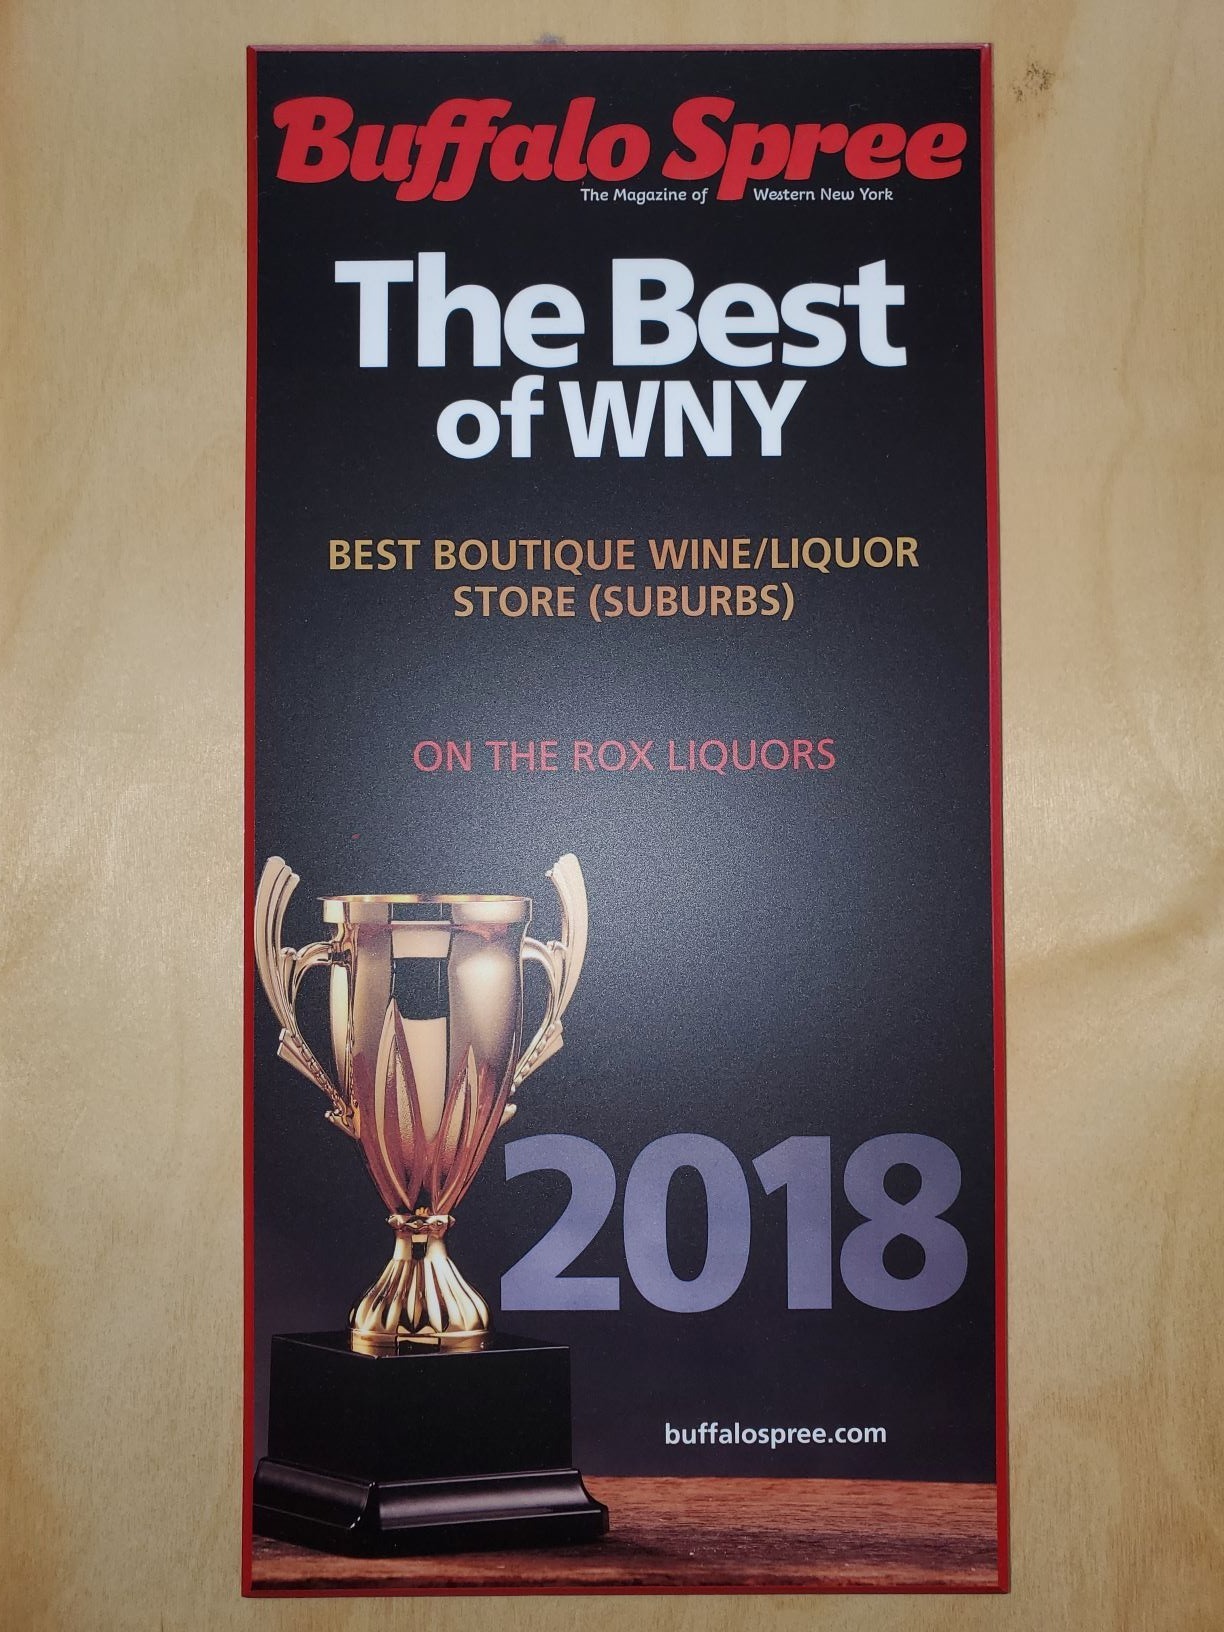 Voted Best Boutique Wine/Liquor Store in Suburbs by Buffalo Spree Magazine (2018)